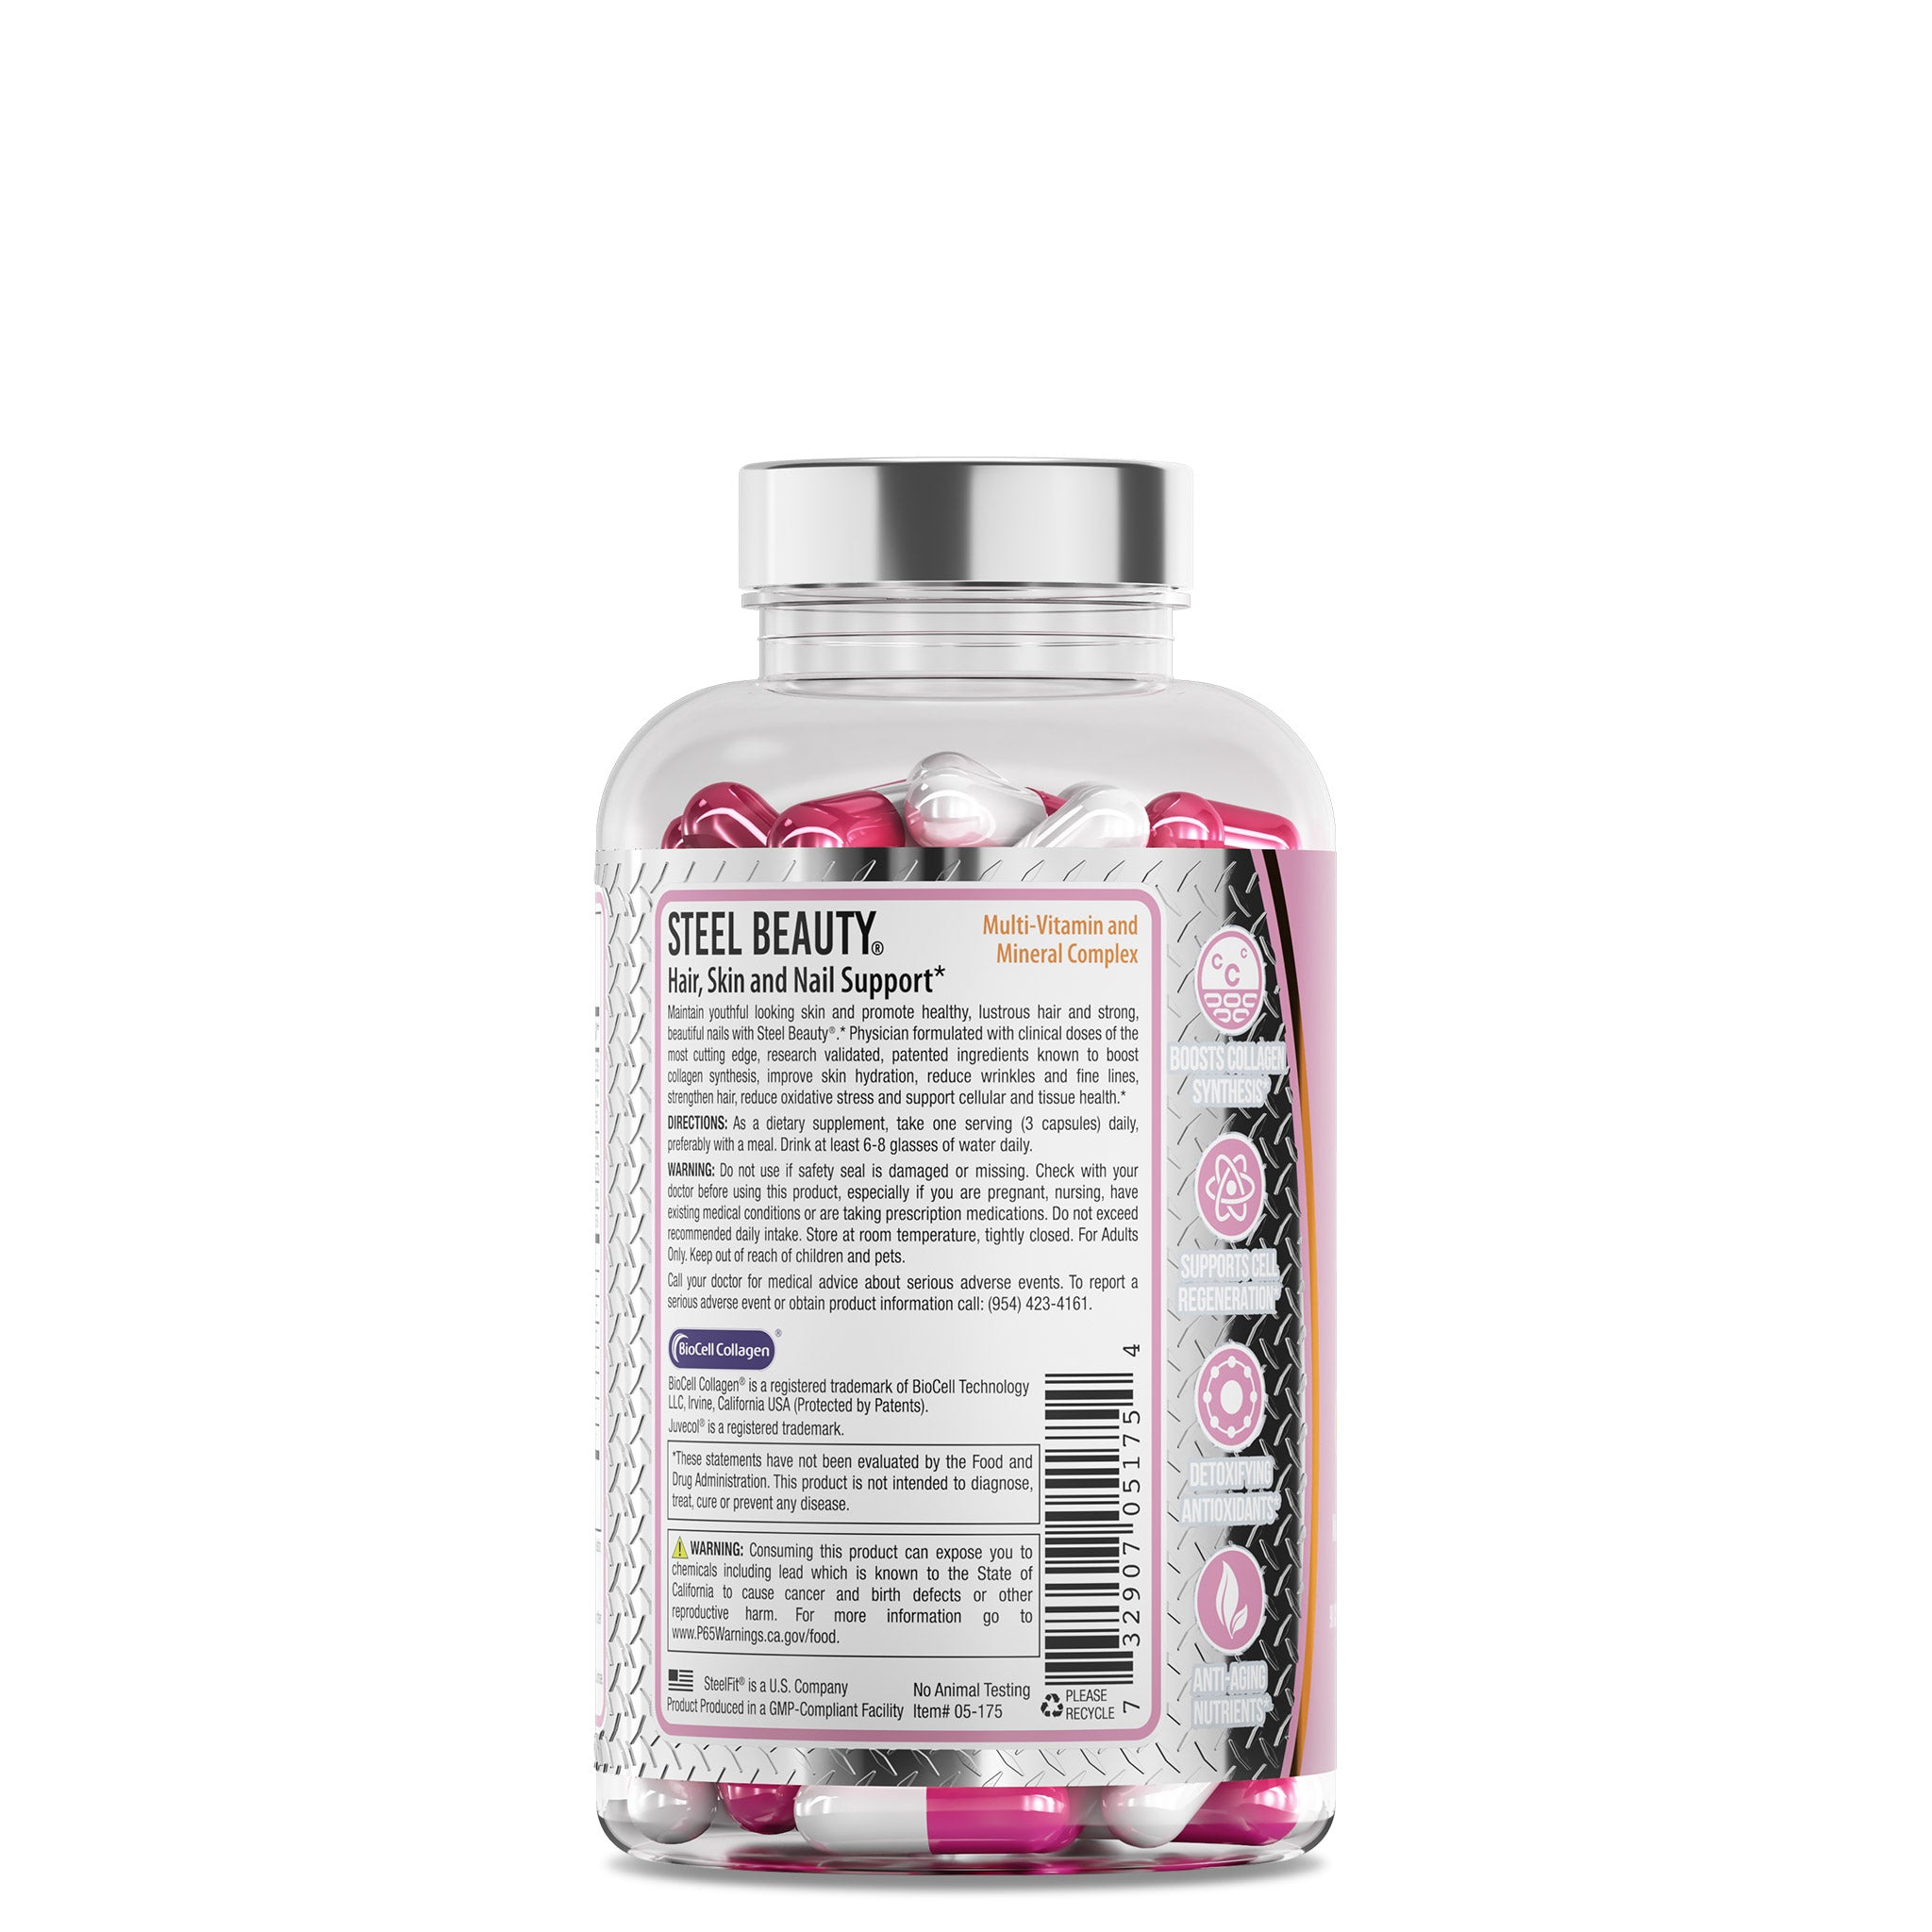 steel beauty hair skin and nail multivitamin with biotin and natural ingredients for strong nails and beautiful hair and skin